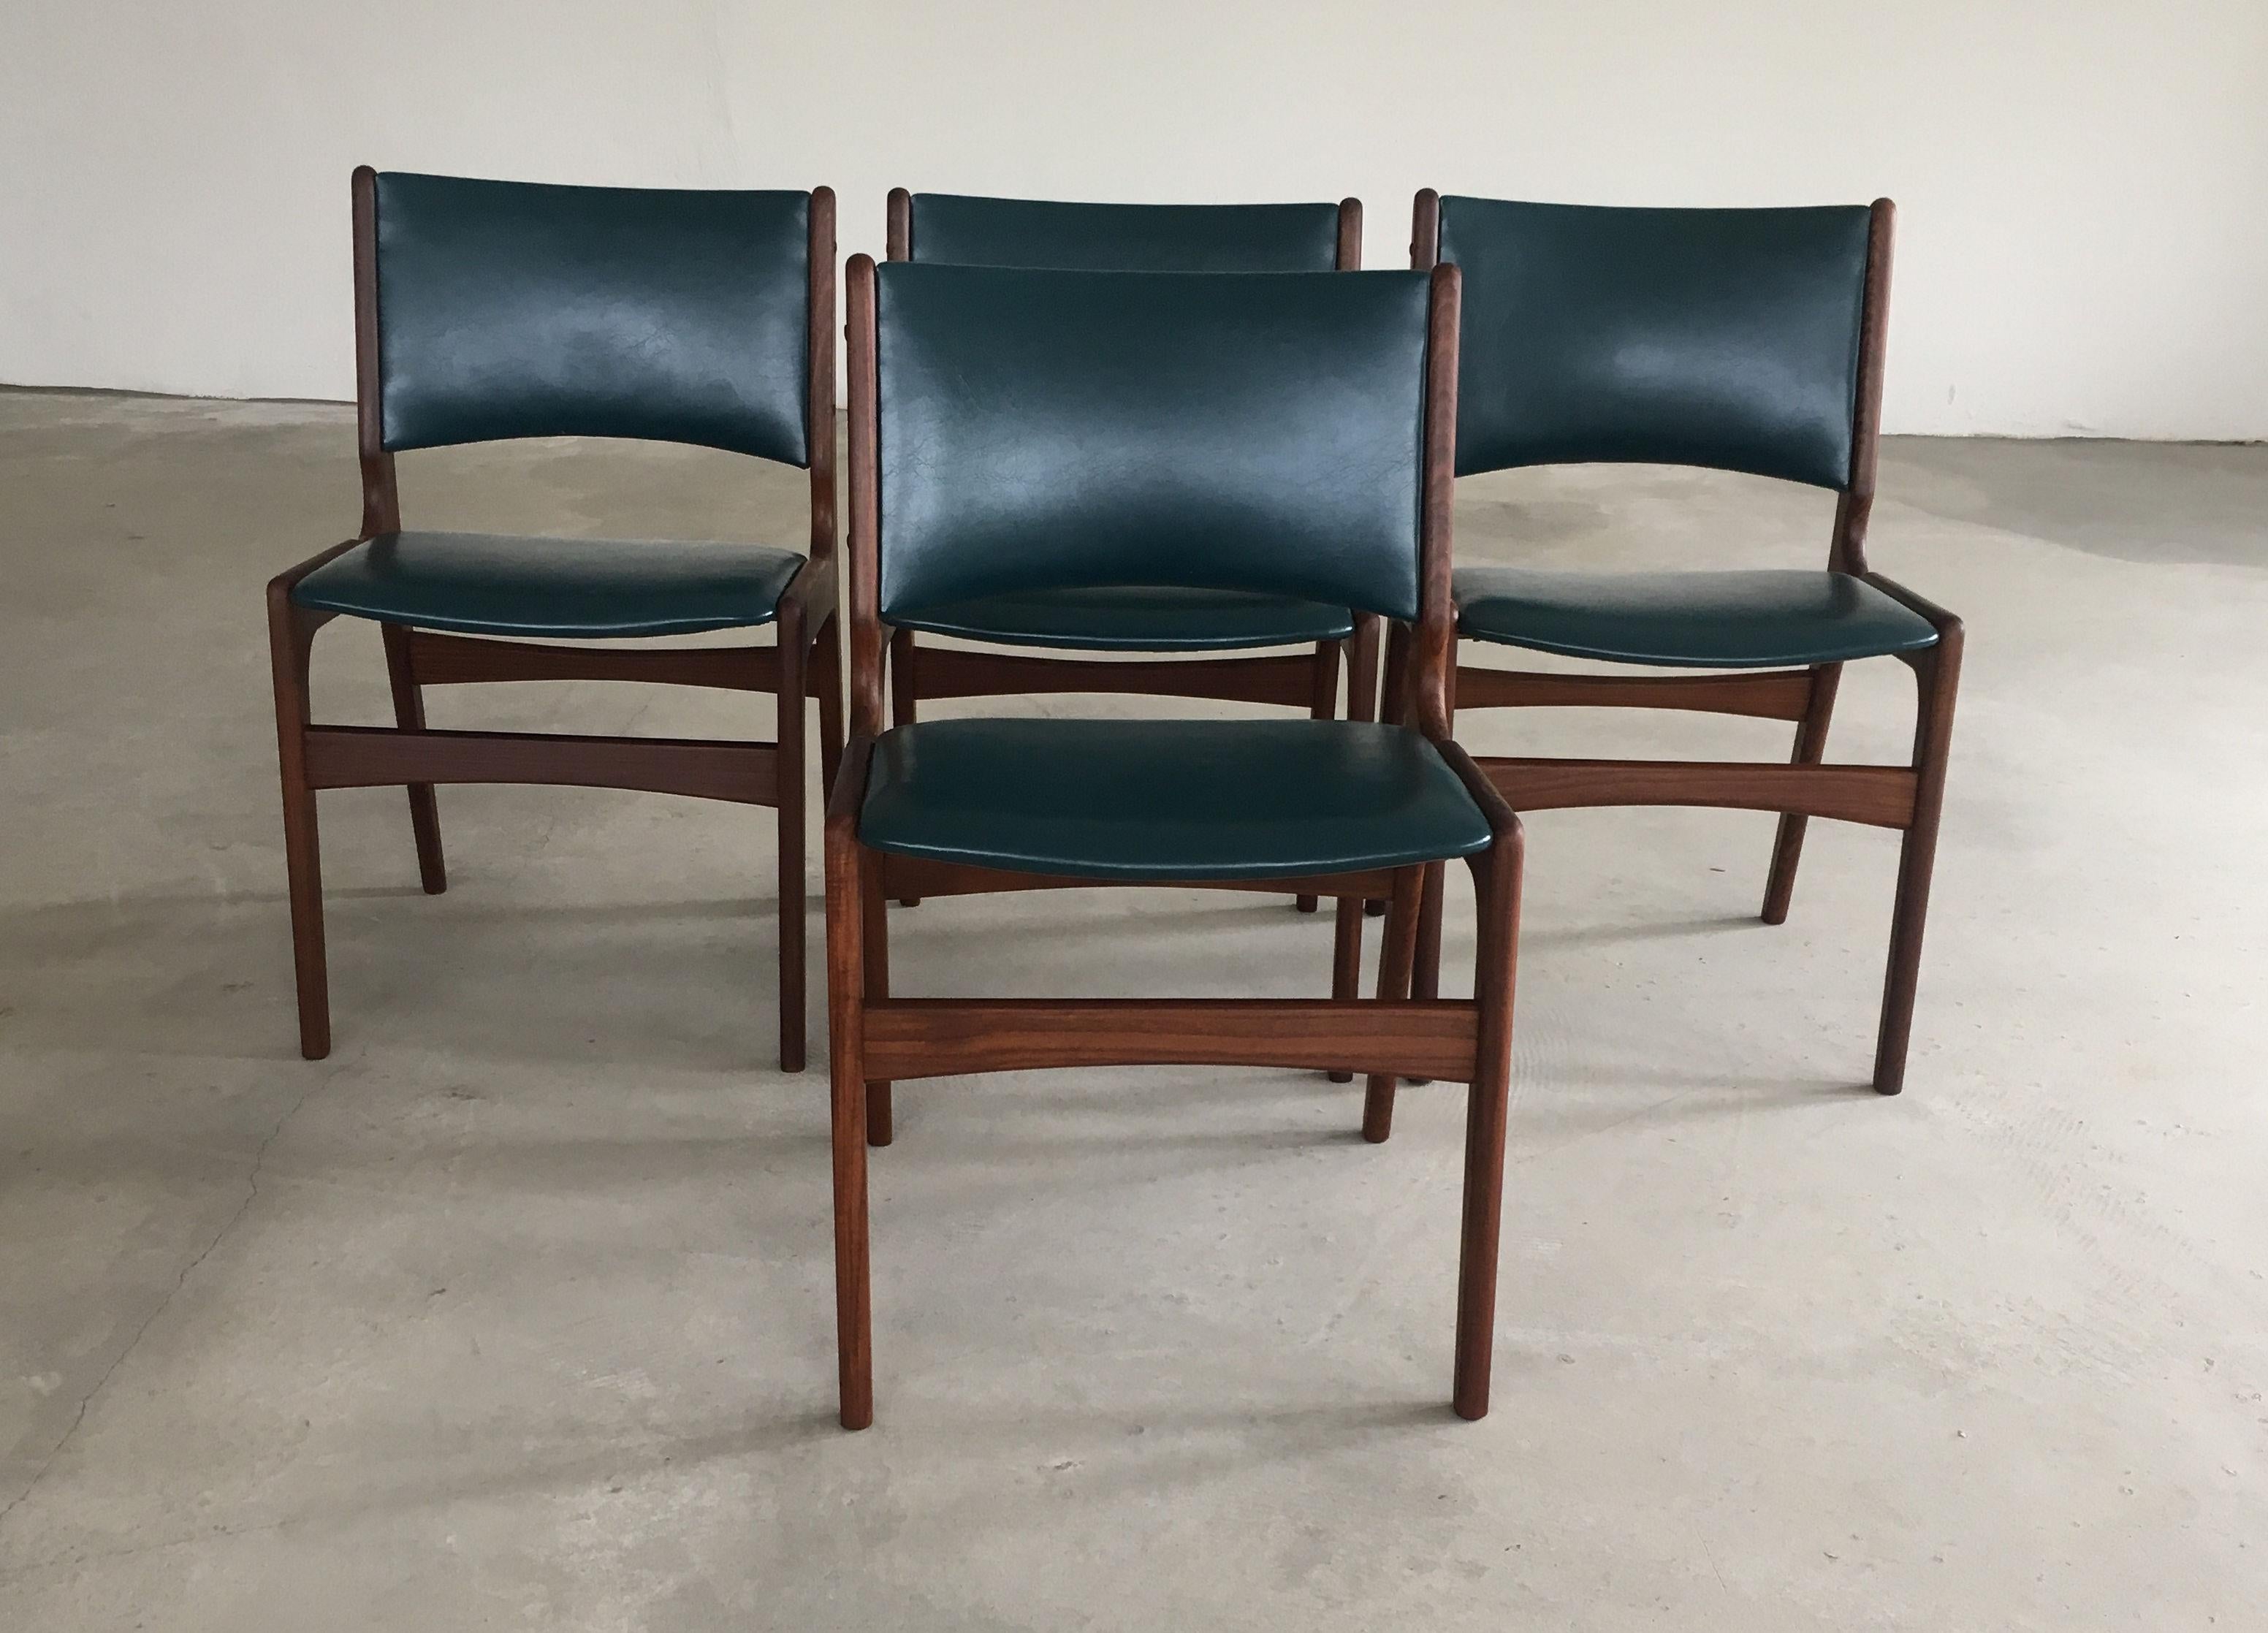 Four Danish Erik Buch dining chairs made by Oddense Maskinsnedkeri.

The chairs feature a solid teak frame and are as all of Erik Buchs chairs characterized by high-quality materials, solid craftsmanship, Scandinavian aesthetic and not least a